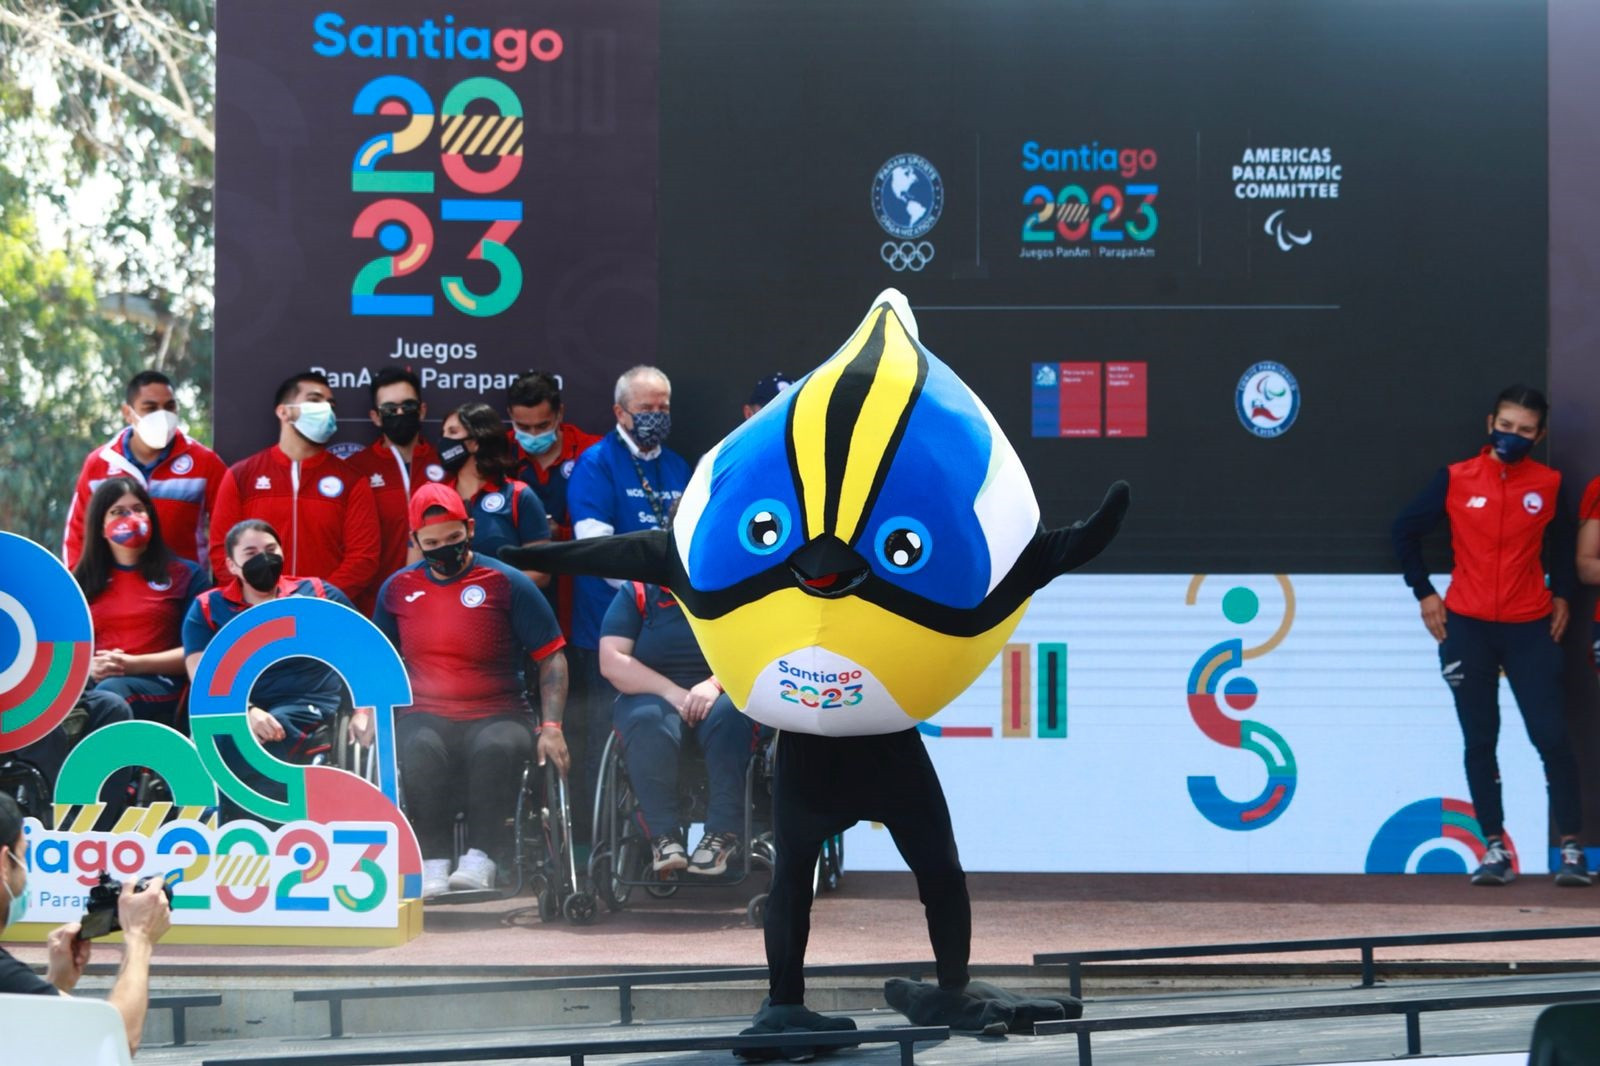 Fiu saw off Chitama, Pewü, Juanchi and Santi to win the official mascot public vote ©Santiago 2023